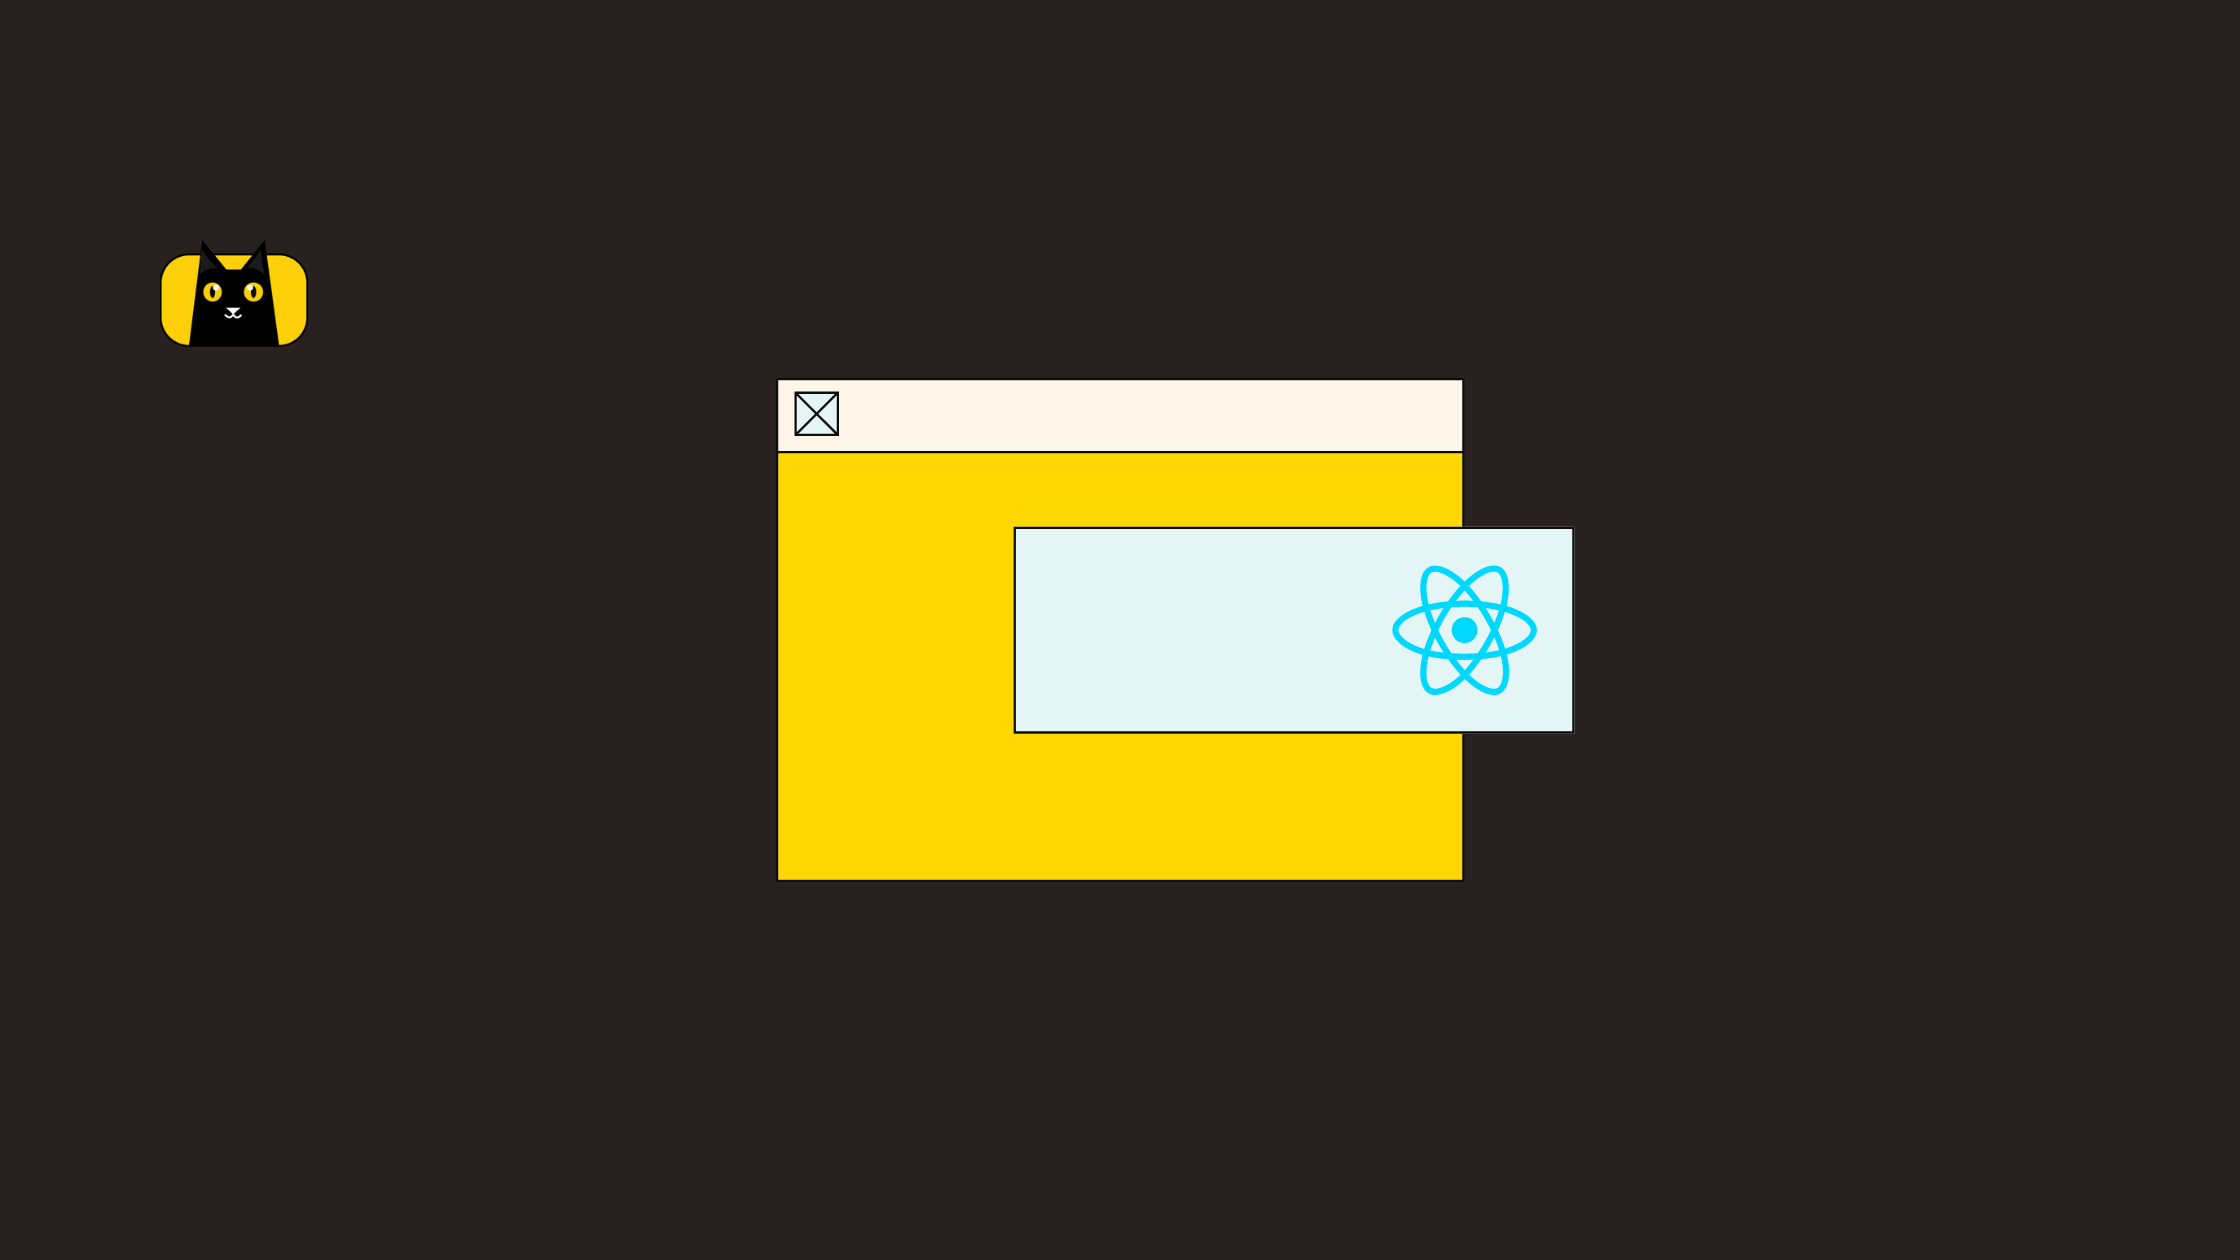 A picture of a browser windows, a React logo, and a CopyCat logo.